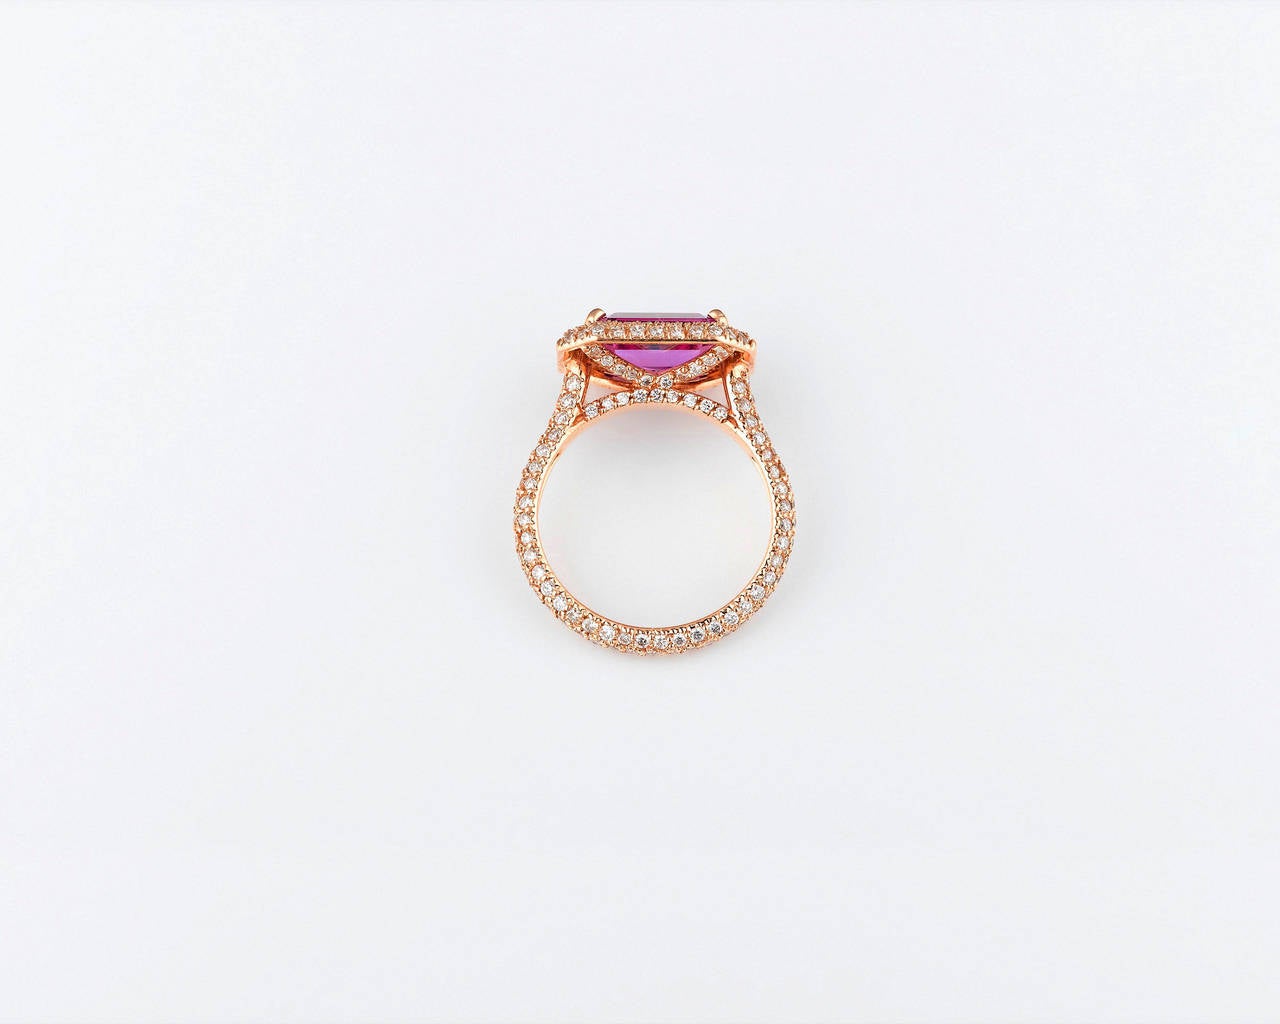 The 2.95-carat, natural pink sapphire in this elegant ring exhibits a distinctive violetish-pink hue, the rarest and most valuable color in which to find one of these legendary stones. This step-cut gem is certified by C. Dunaigre Consulting as a